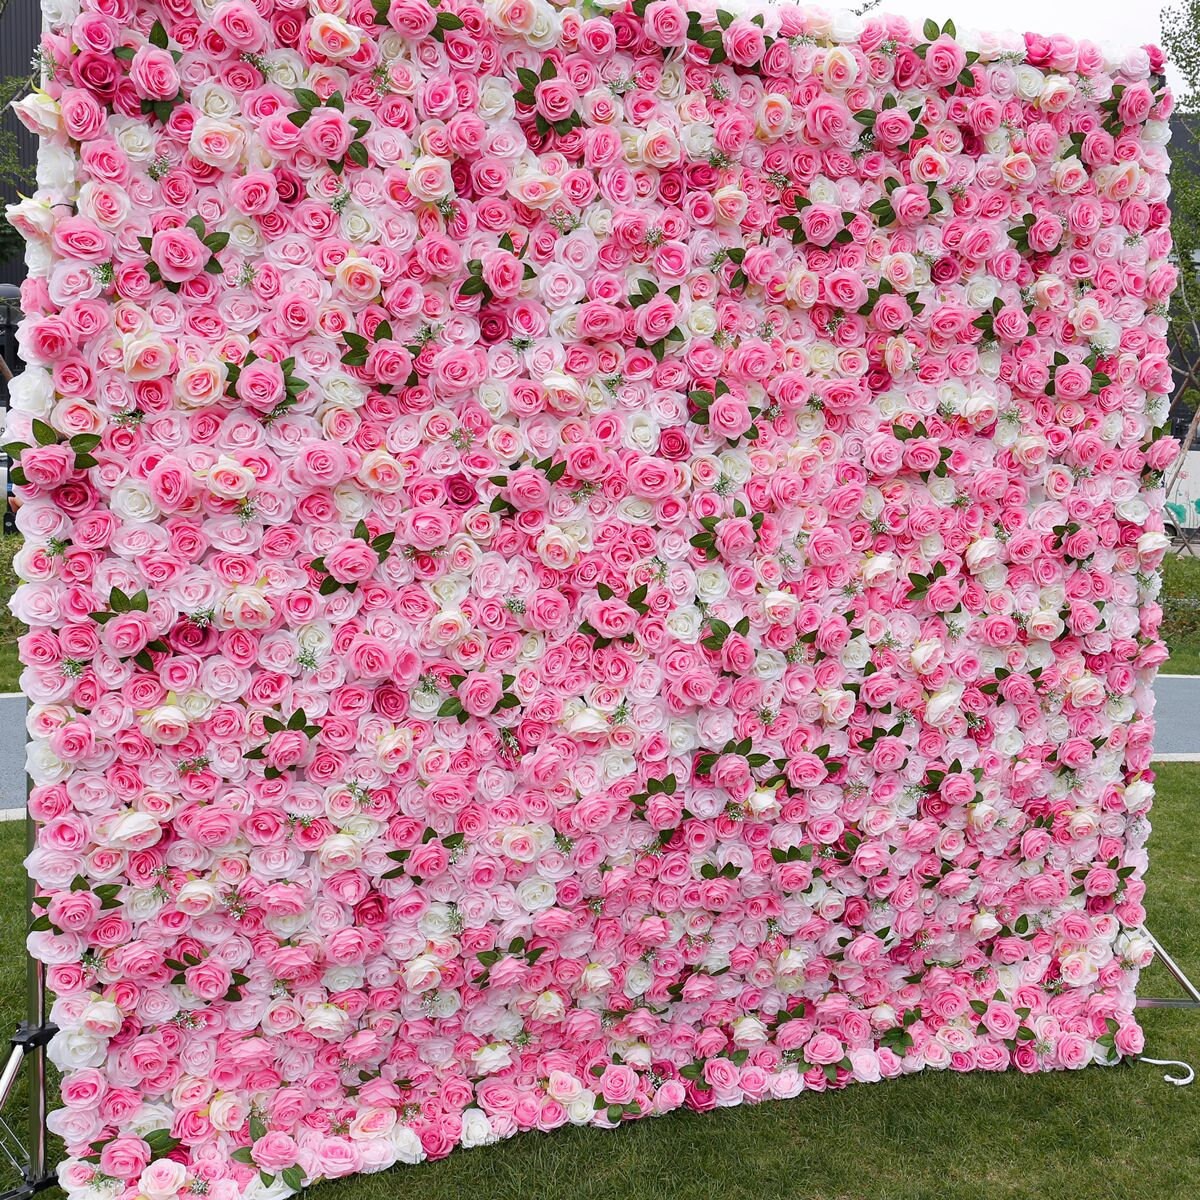 Pink Floral Wall For Wedding Arrangement Event Salon Party Photography Backdrop Fabric Rolling Up Curtain Fabric Cloth